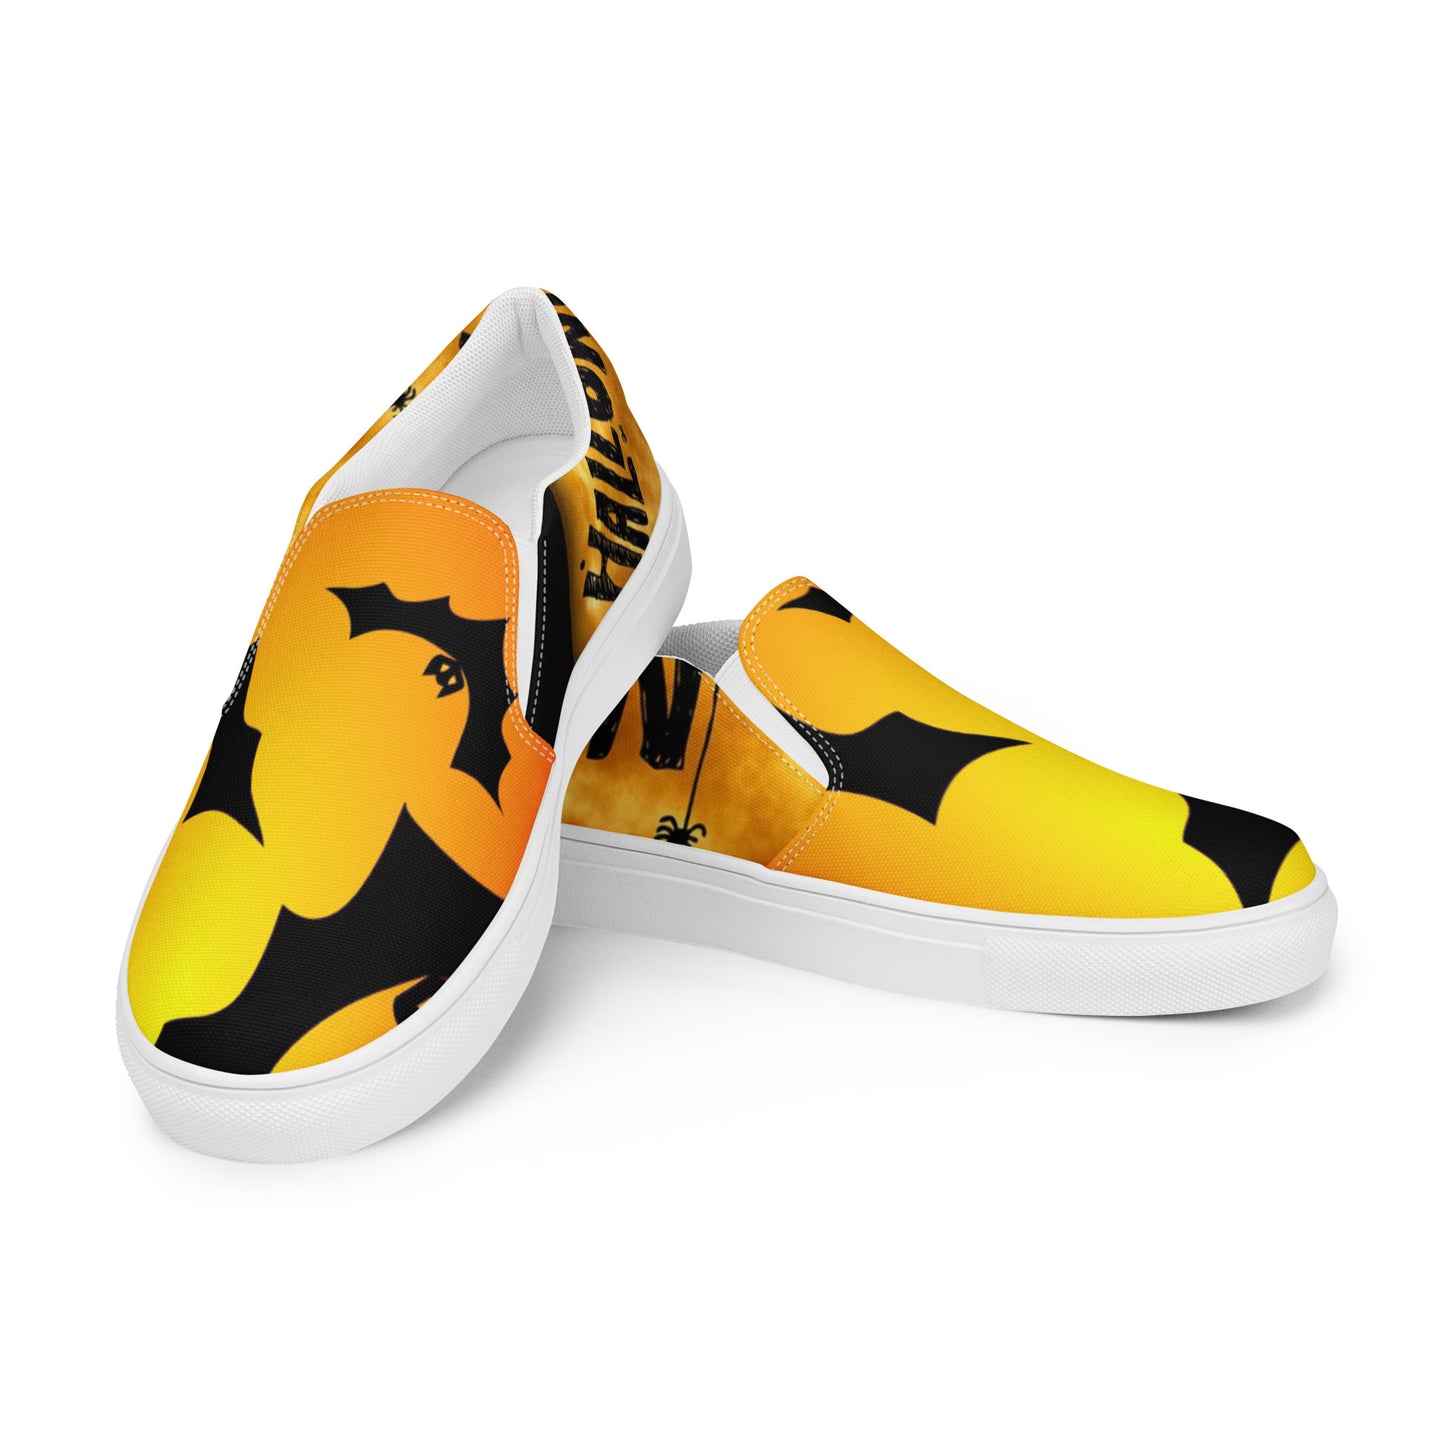 Women’s slip-on shoes "LIMITED" (Halloween theme)